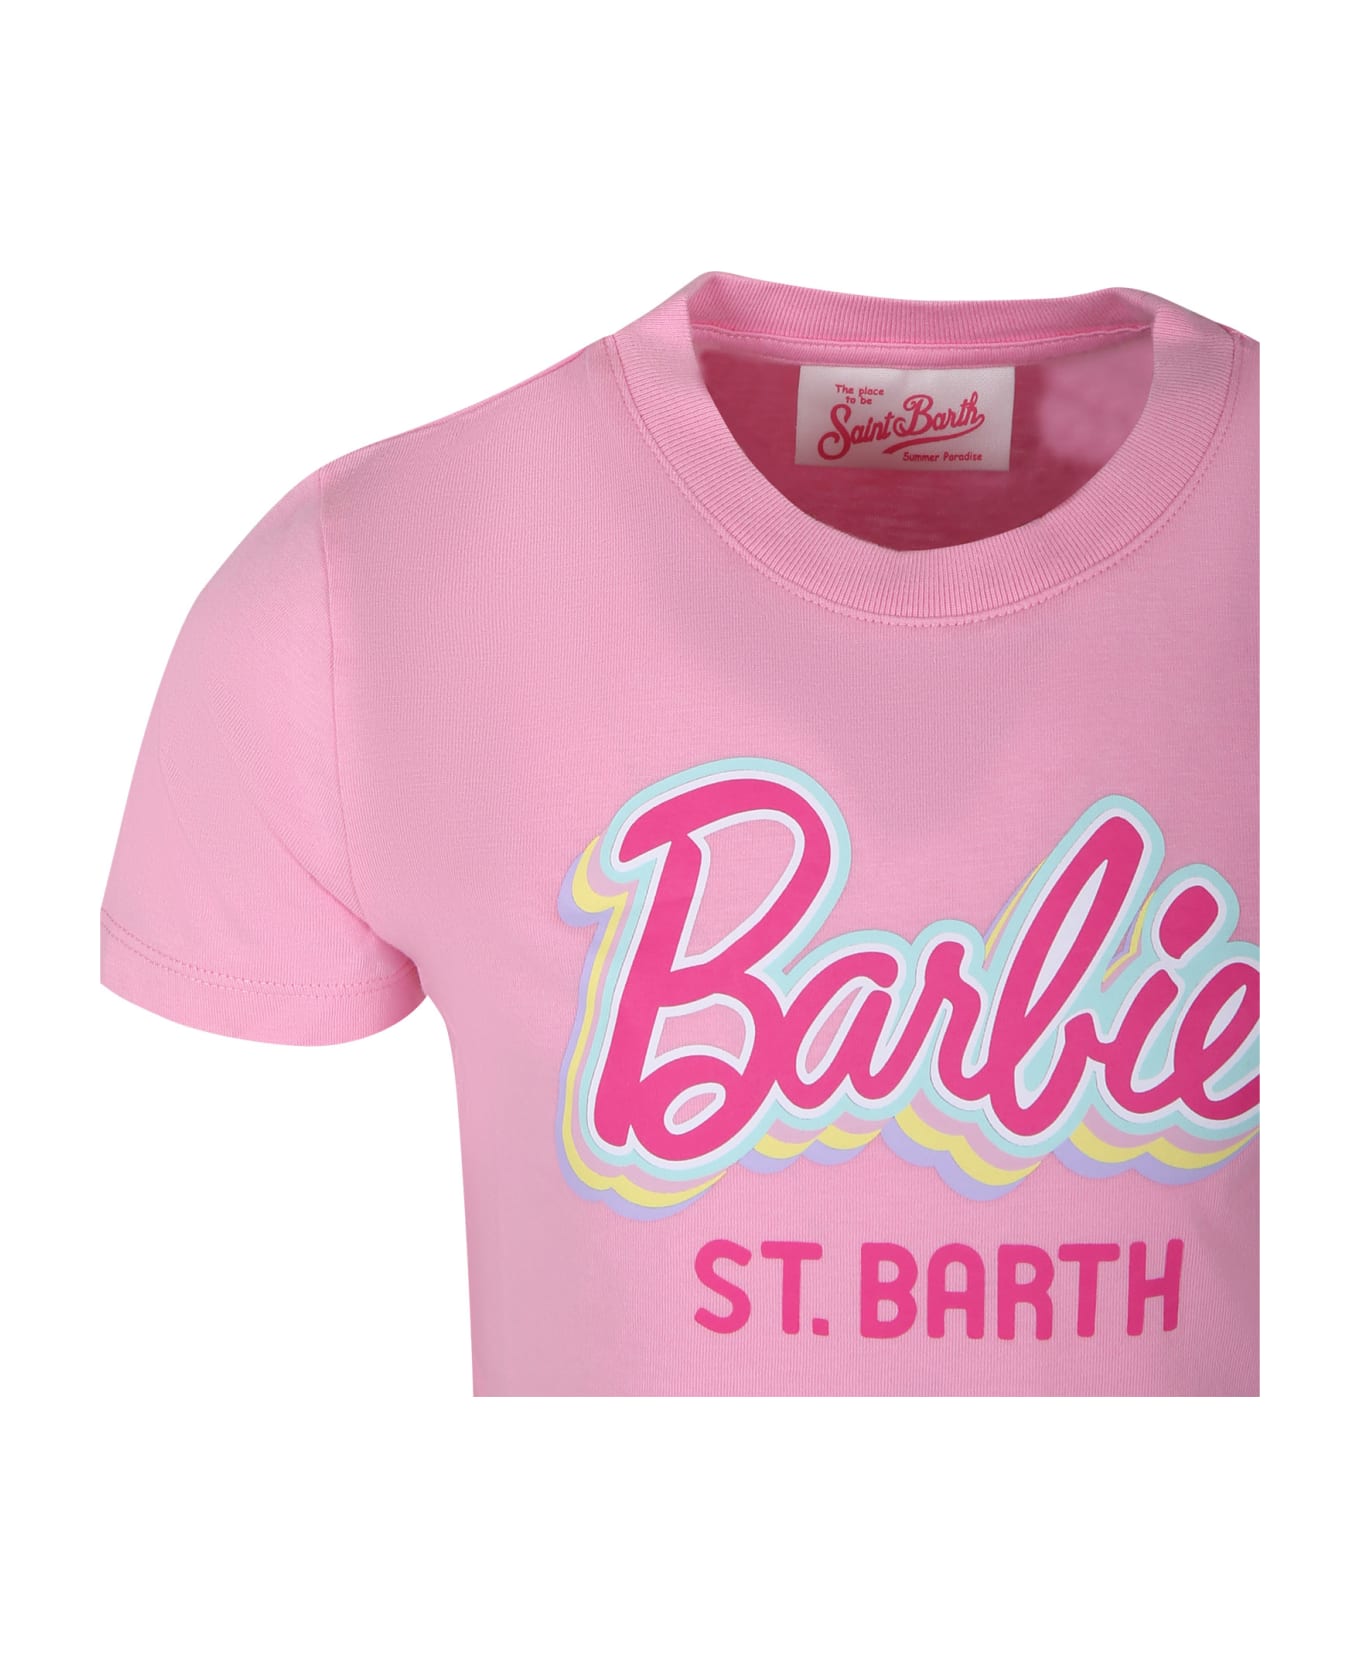 MC2 Saint Barth Pink T-shirt For Girl With Writing - Pink